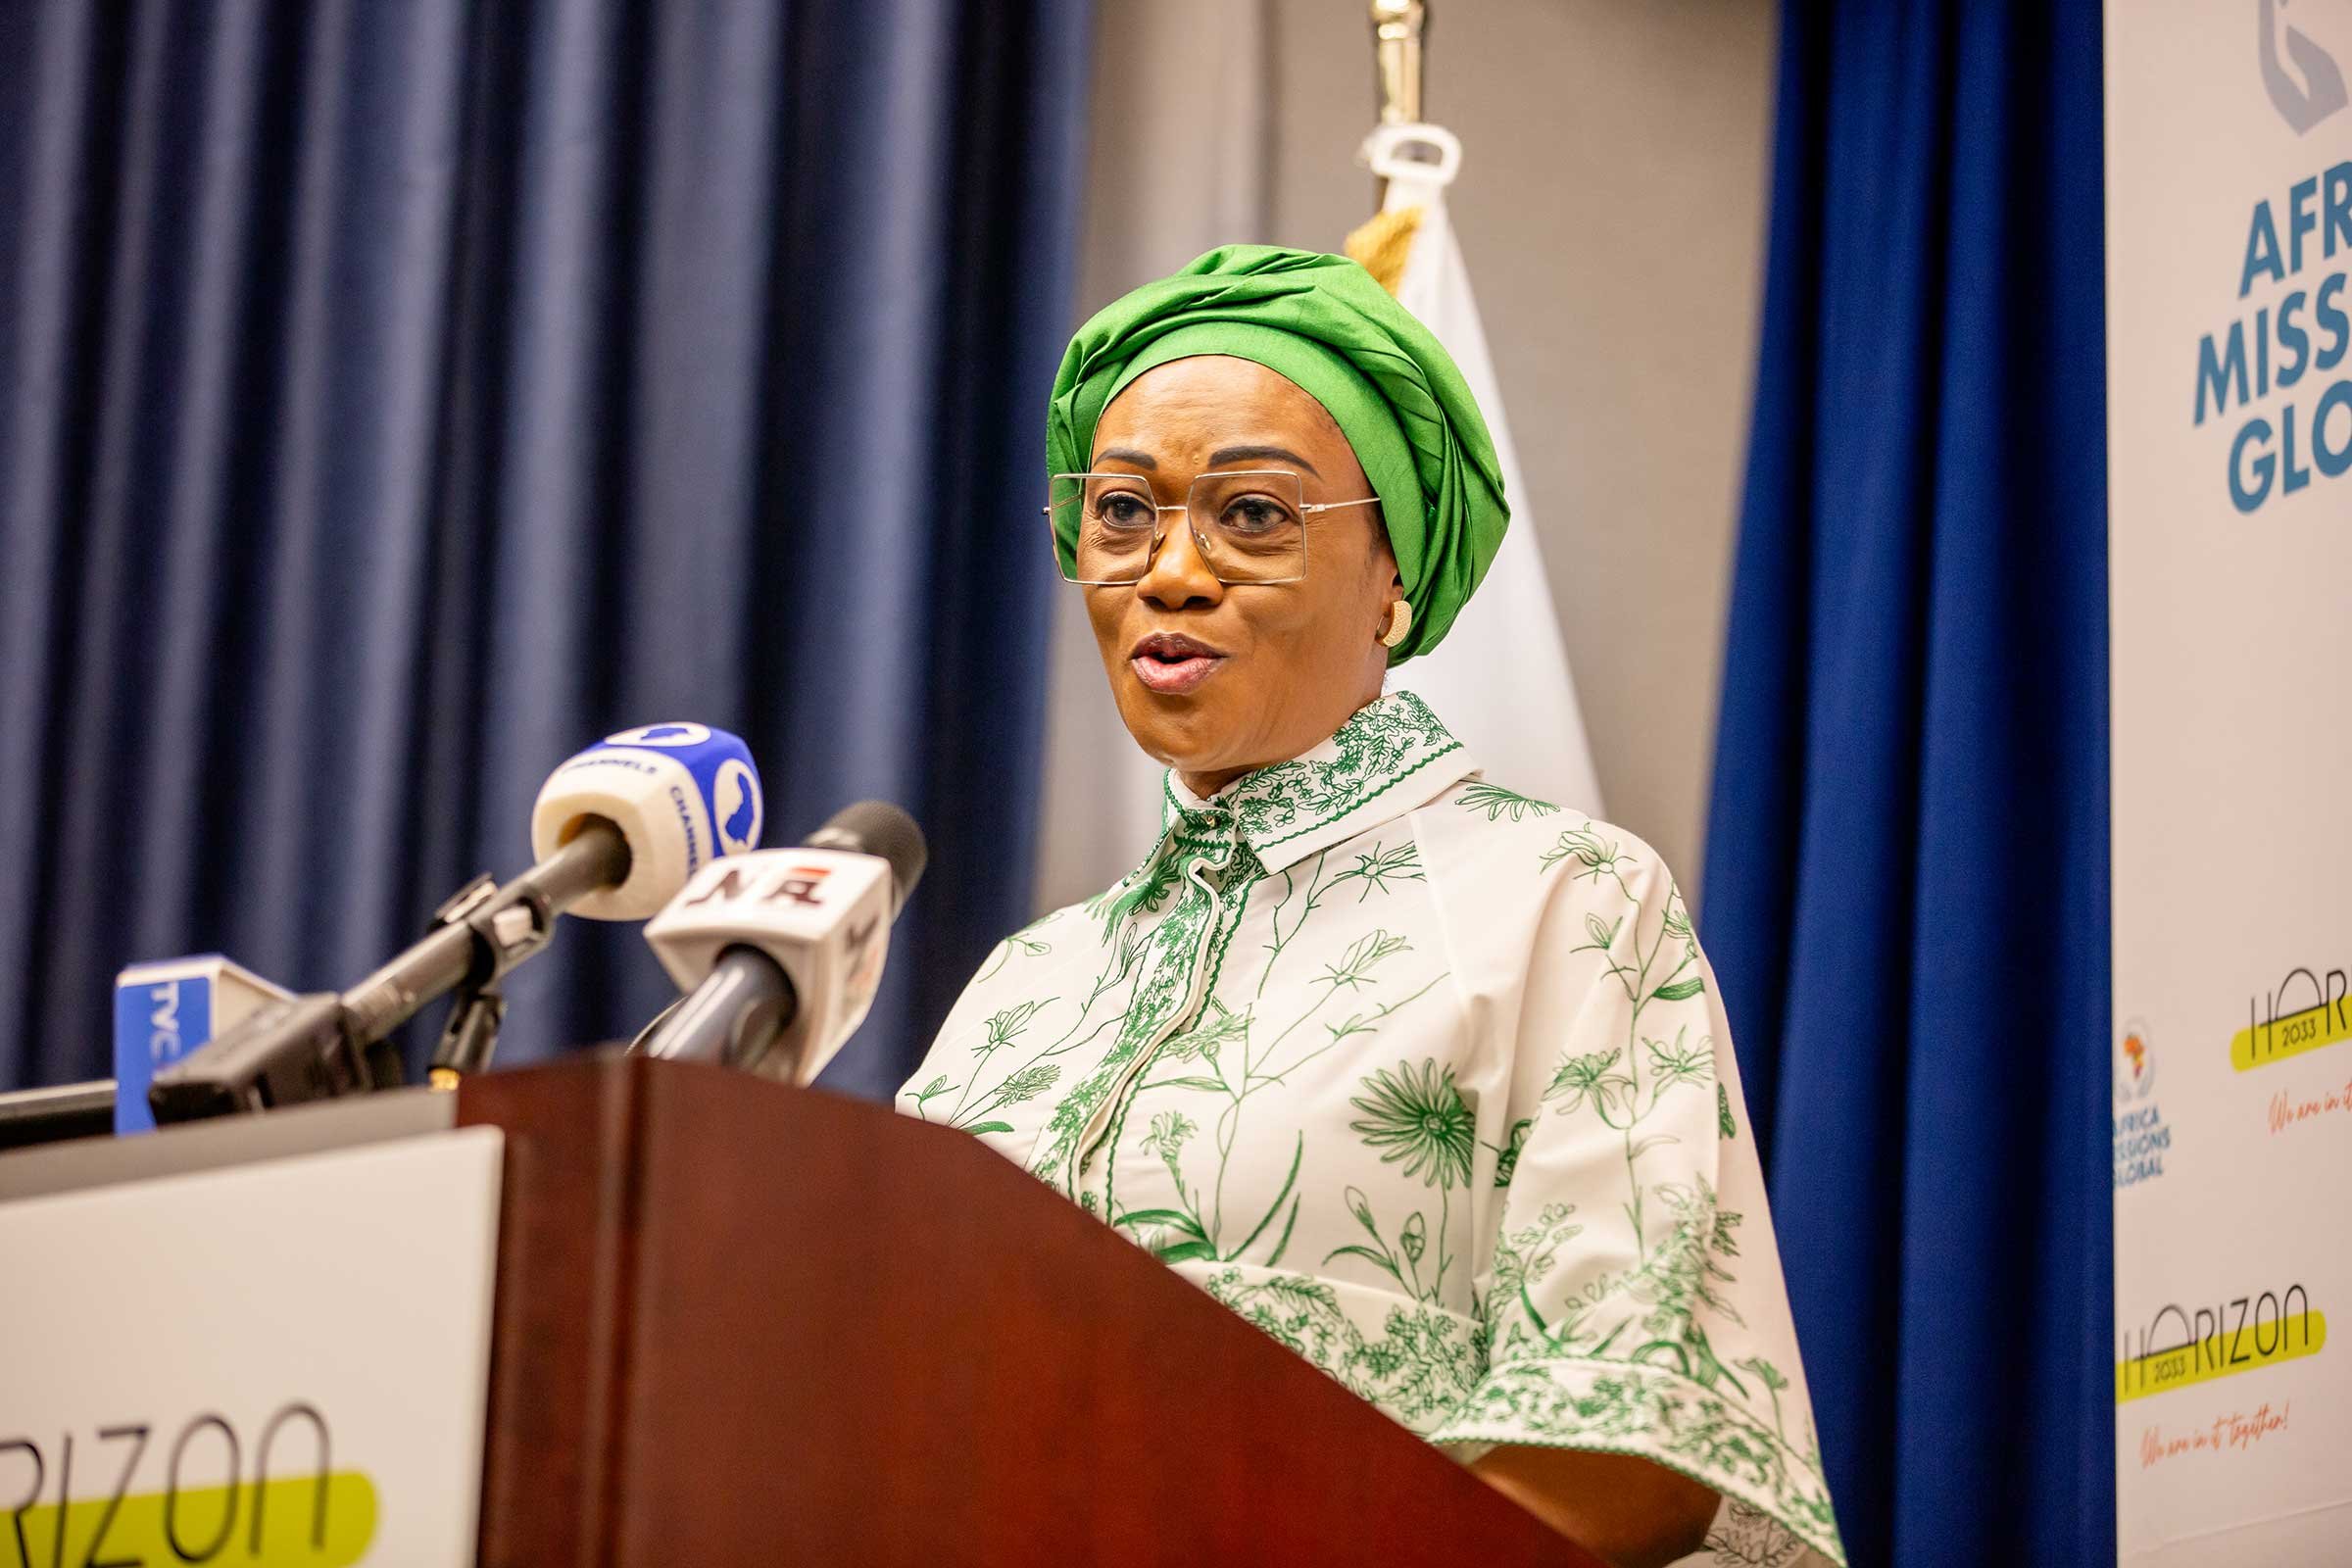  Her Excellency, the First Lady of Nigeria, Pastor Mrs. Oluremi Tinubu, addresses the Africa Missions Global 'Horizon 2033' event at the U.N., New York, NY 